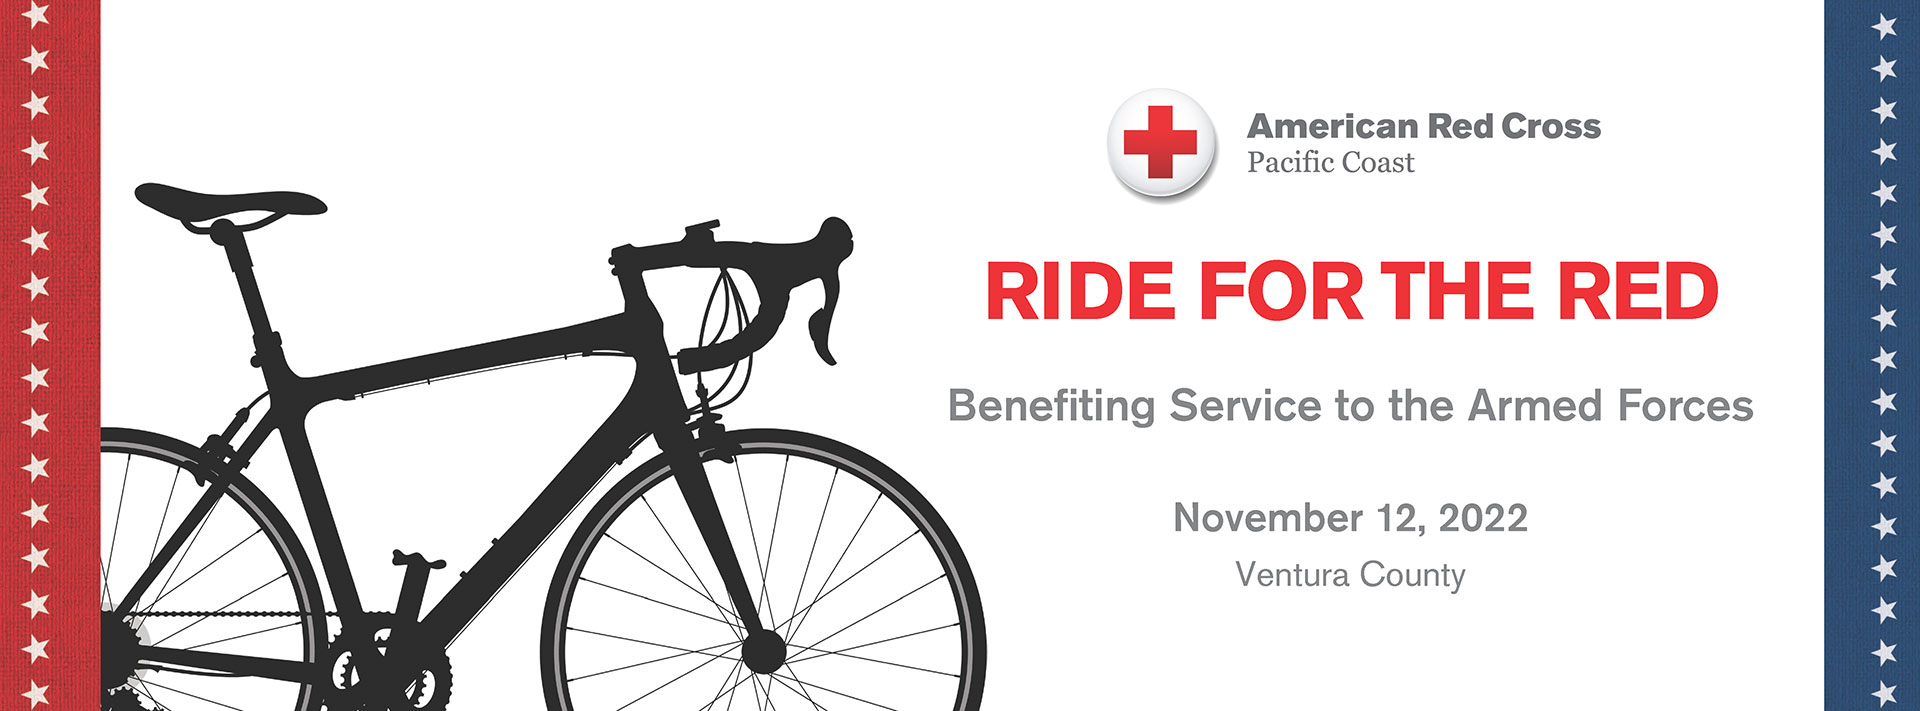 Your-Home-Sold-Guaranteed-Realty-is-The-Corporate-Sponsor-for-The-American-Red-Cross-Ride-for-the-Red-2022.jpg